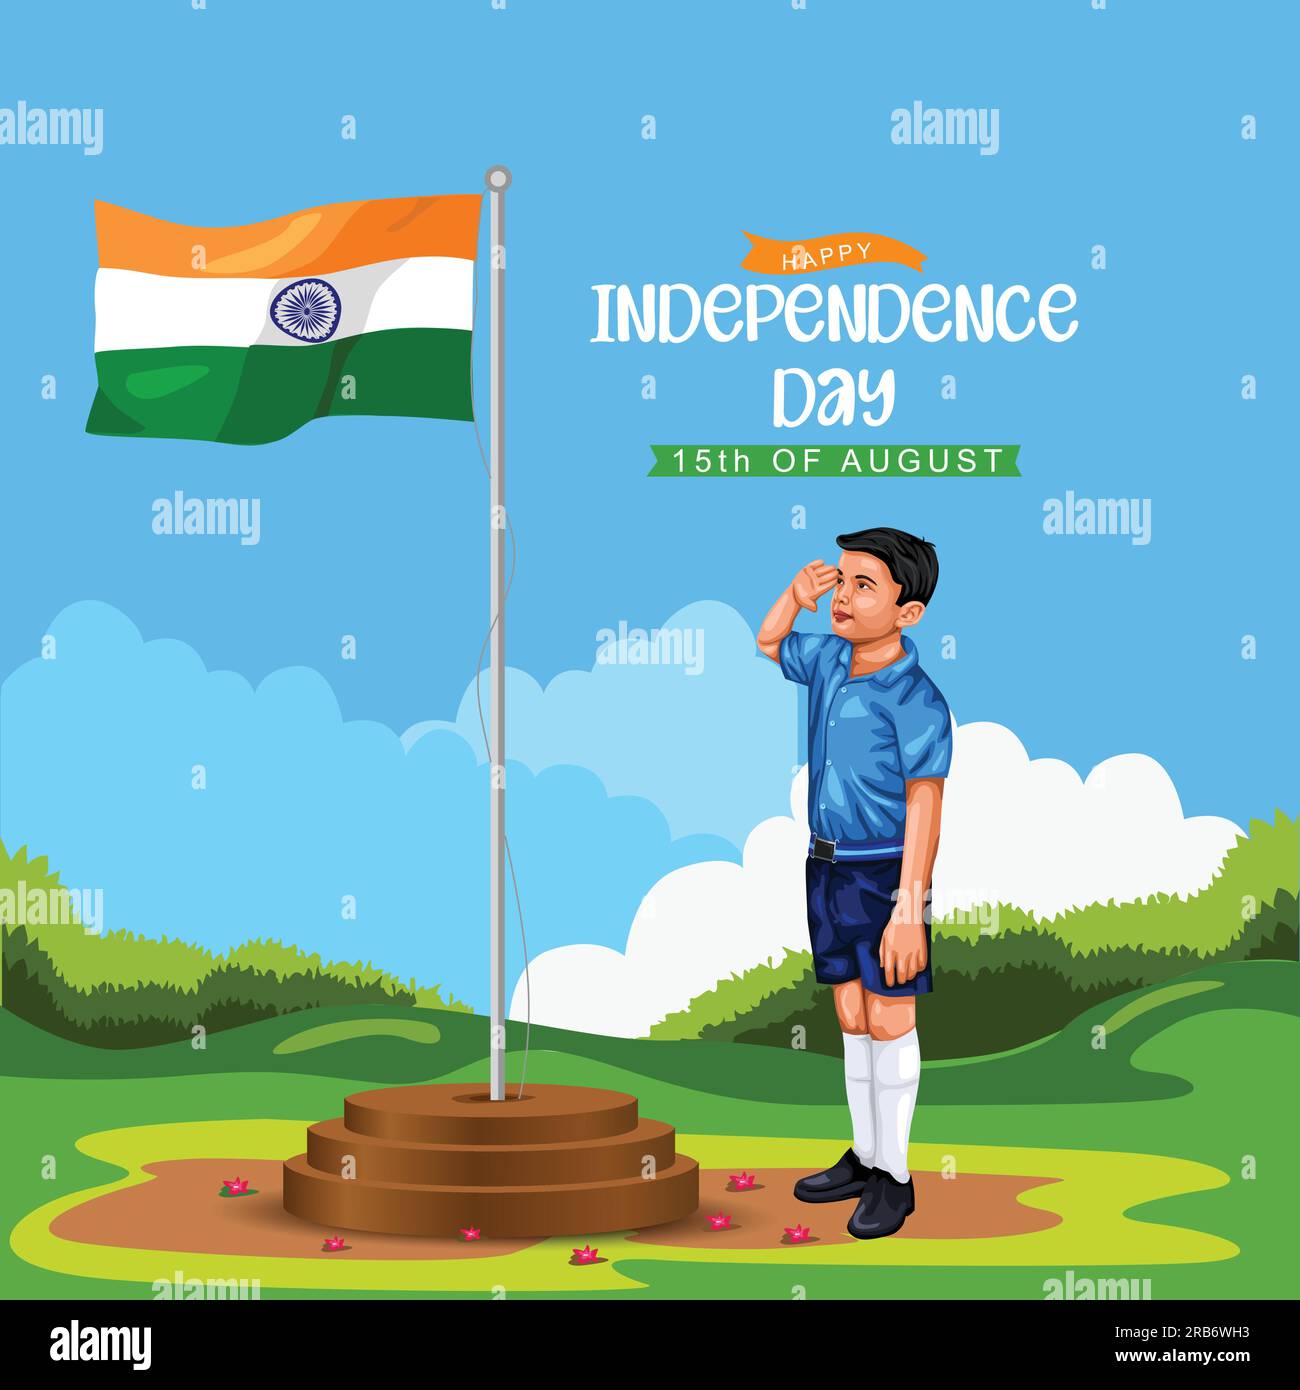 happy independence day India. Indian student saluting flag of India. abstract vector illustration design flyer Stock Vector